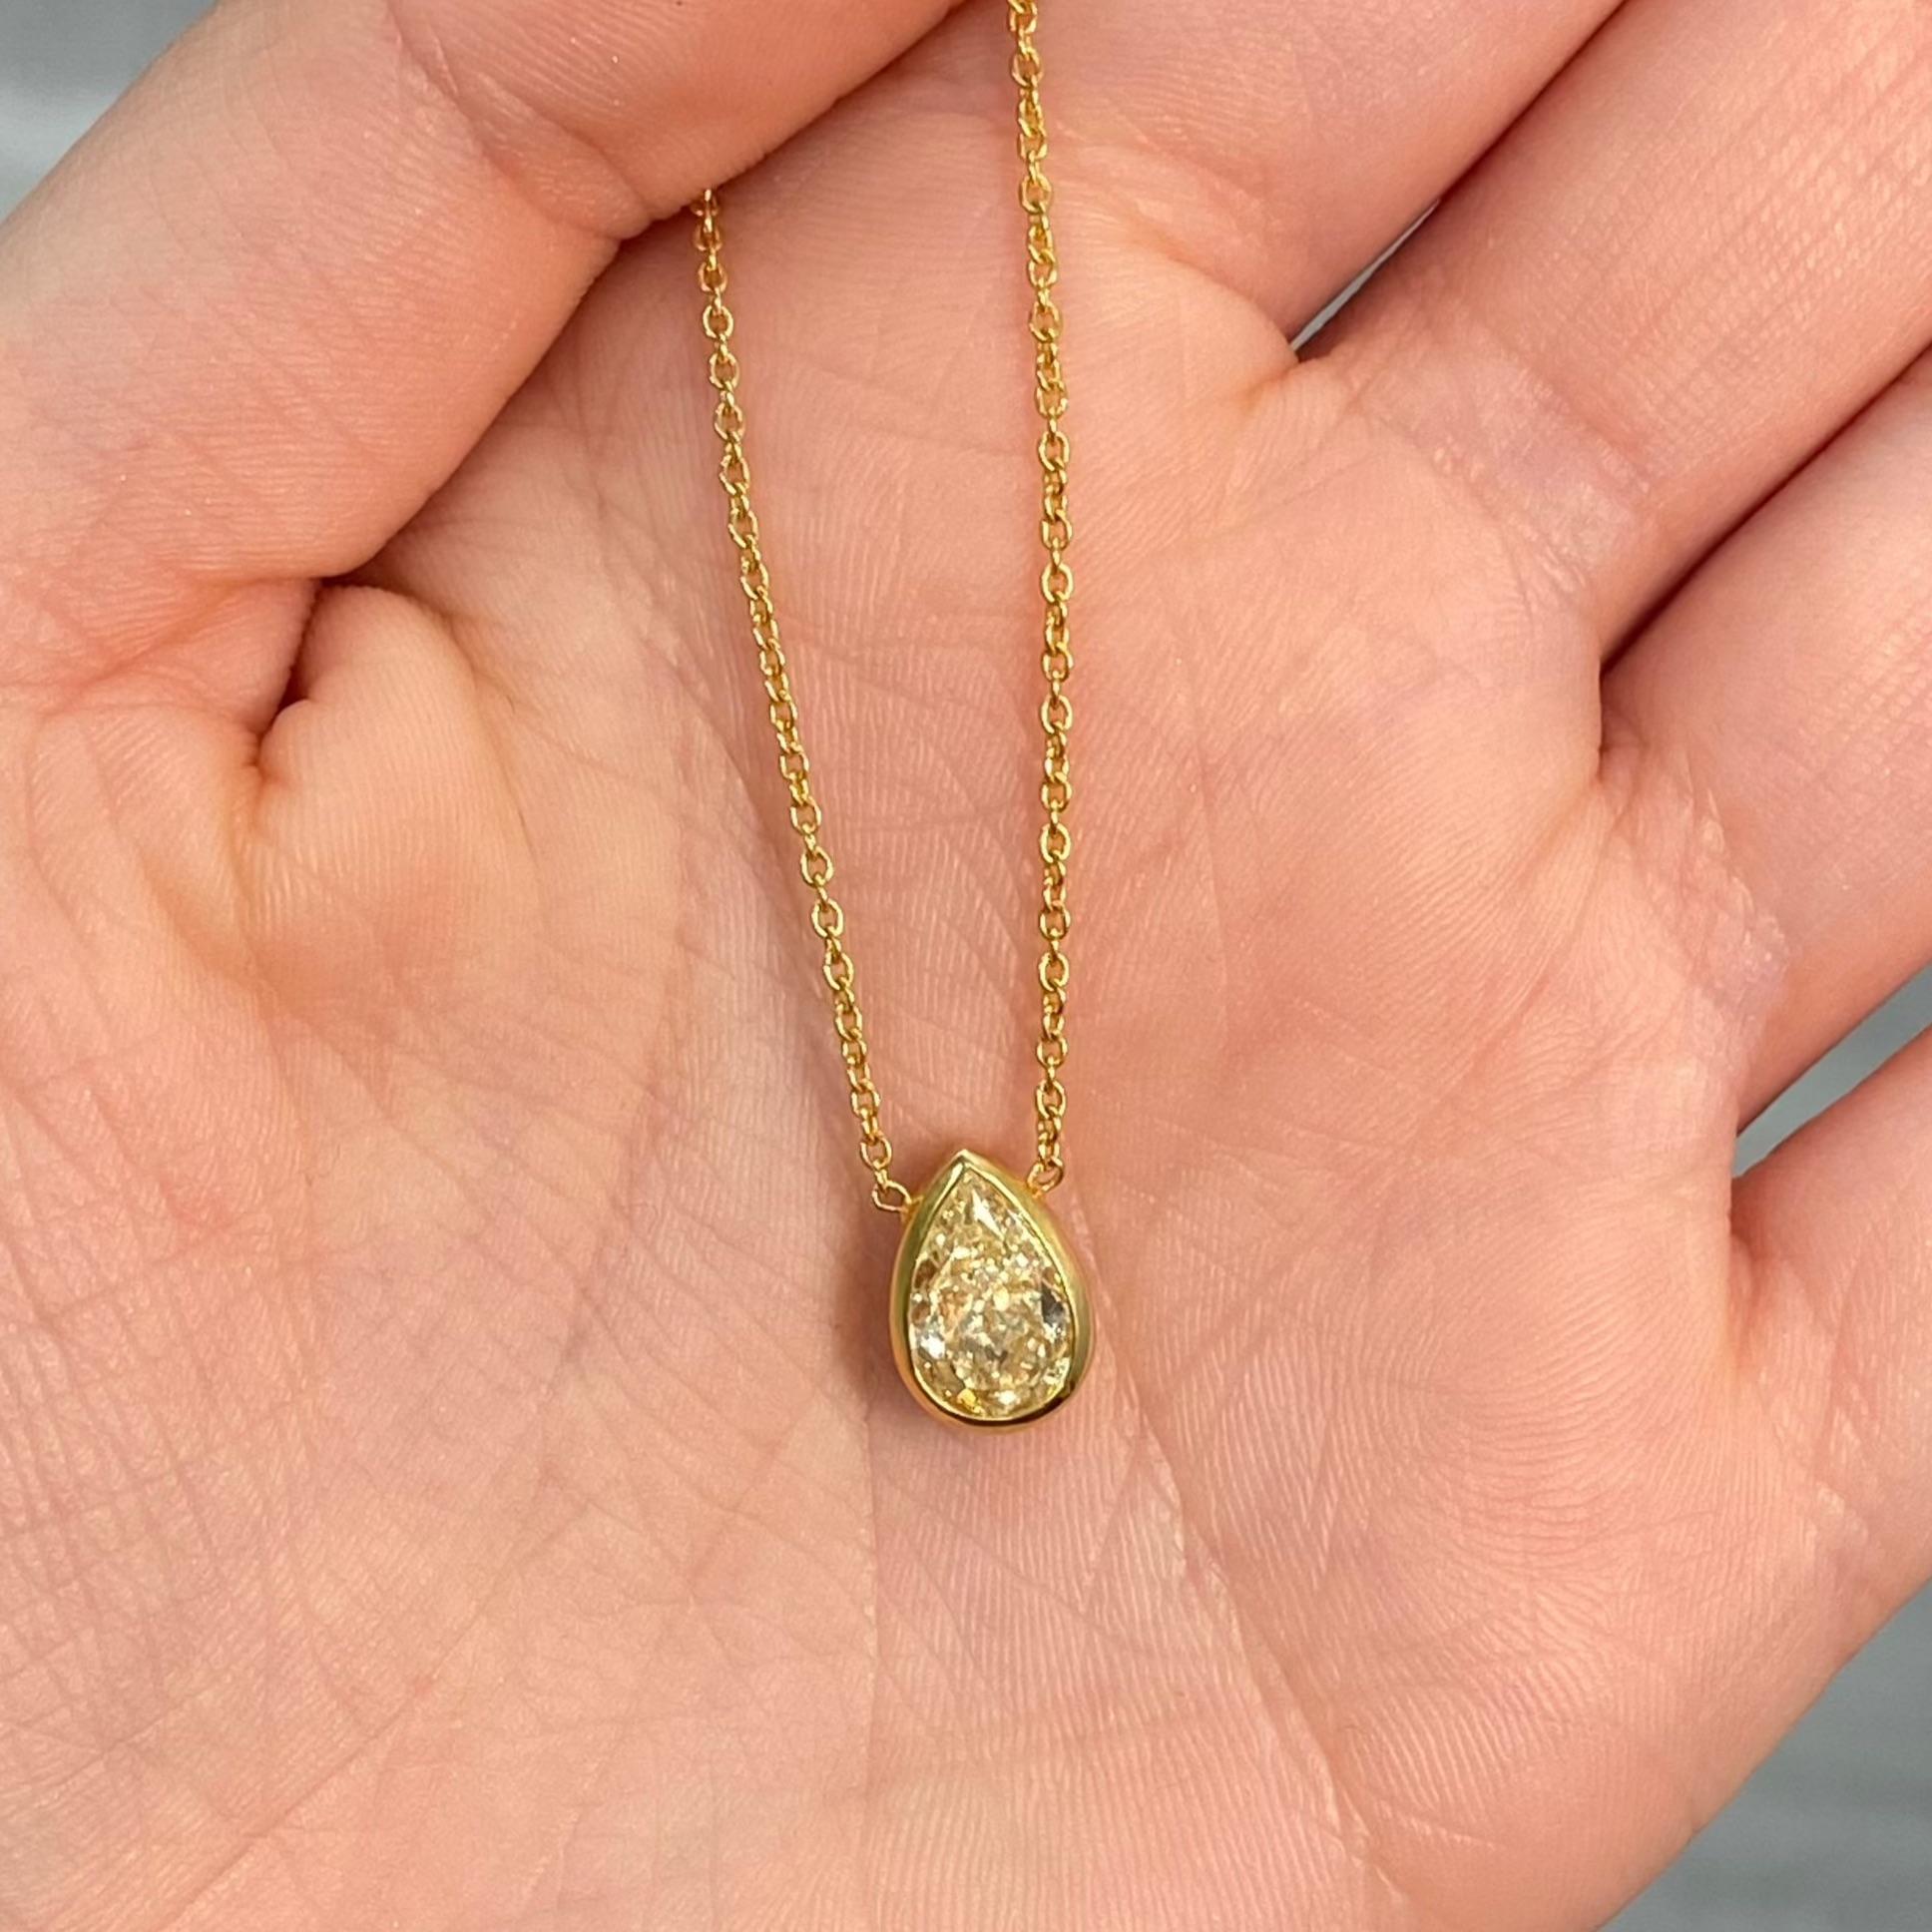 1.53 Carat Center
Pear Shape
Light Yellow (YZ)
Sleek Bezel Setting
Crafted in 18k Yellow Gold
Handmade in NYC

This piece can be viewed before purchase in our showroom in NYC, or at one of our retail partners throughout the country, please inquire